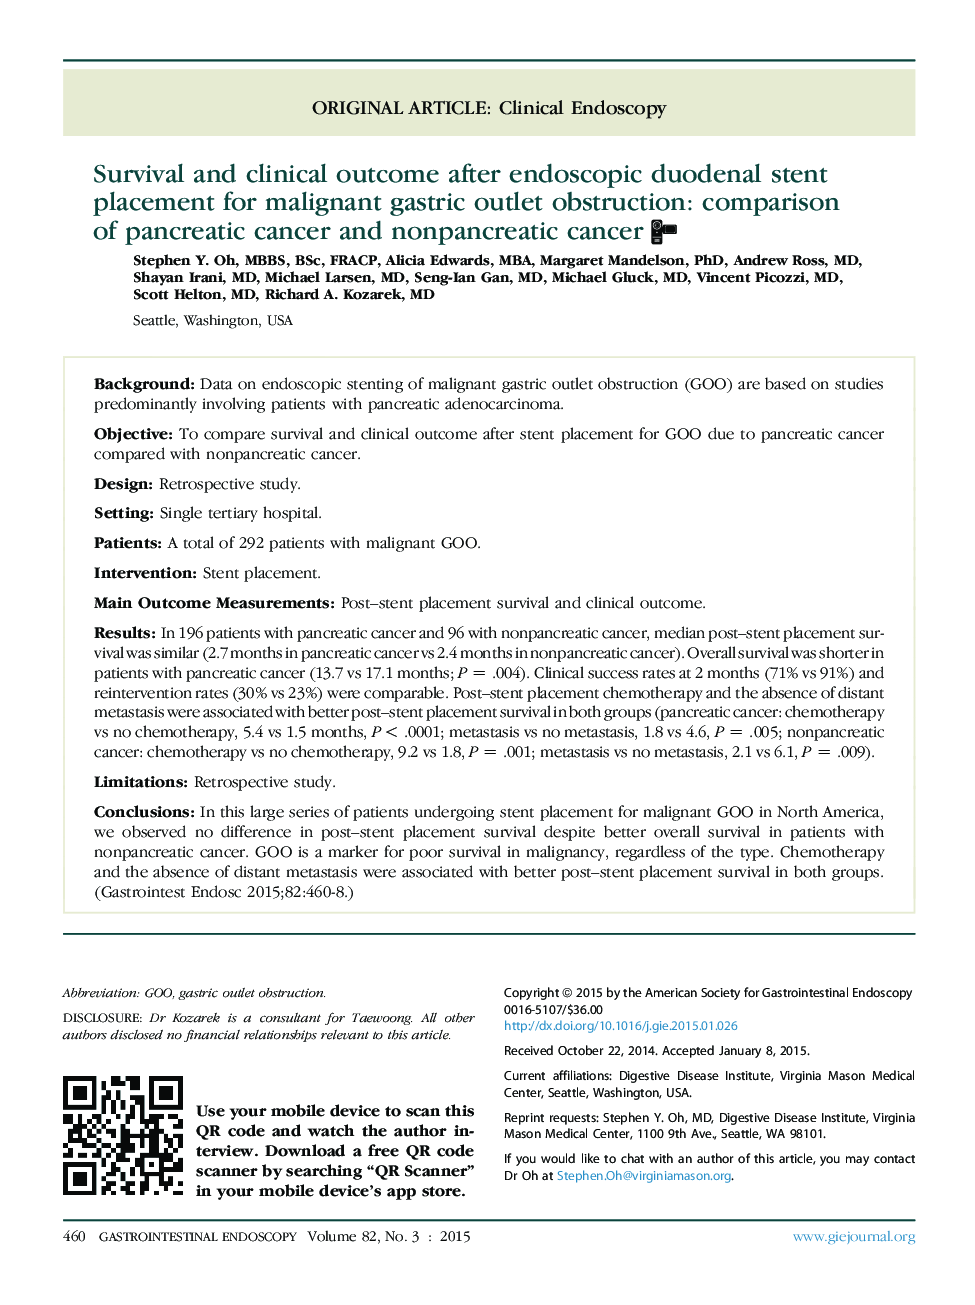 Survival and clinical outcome after endoscopic duodenal stent placement for malignant gastric outlet obstruction: comparison of pancreatic cancer and nonpancreatic cancer